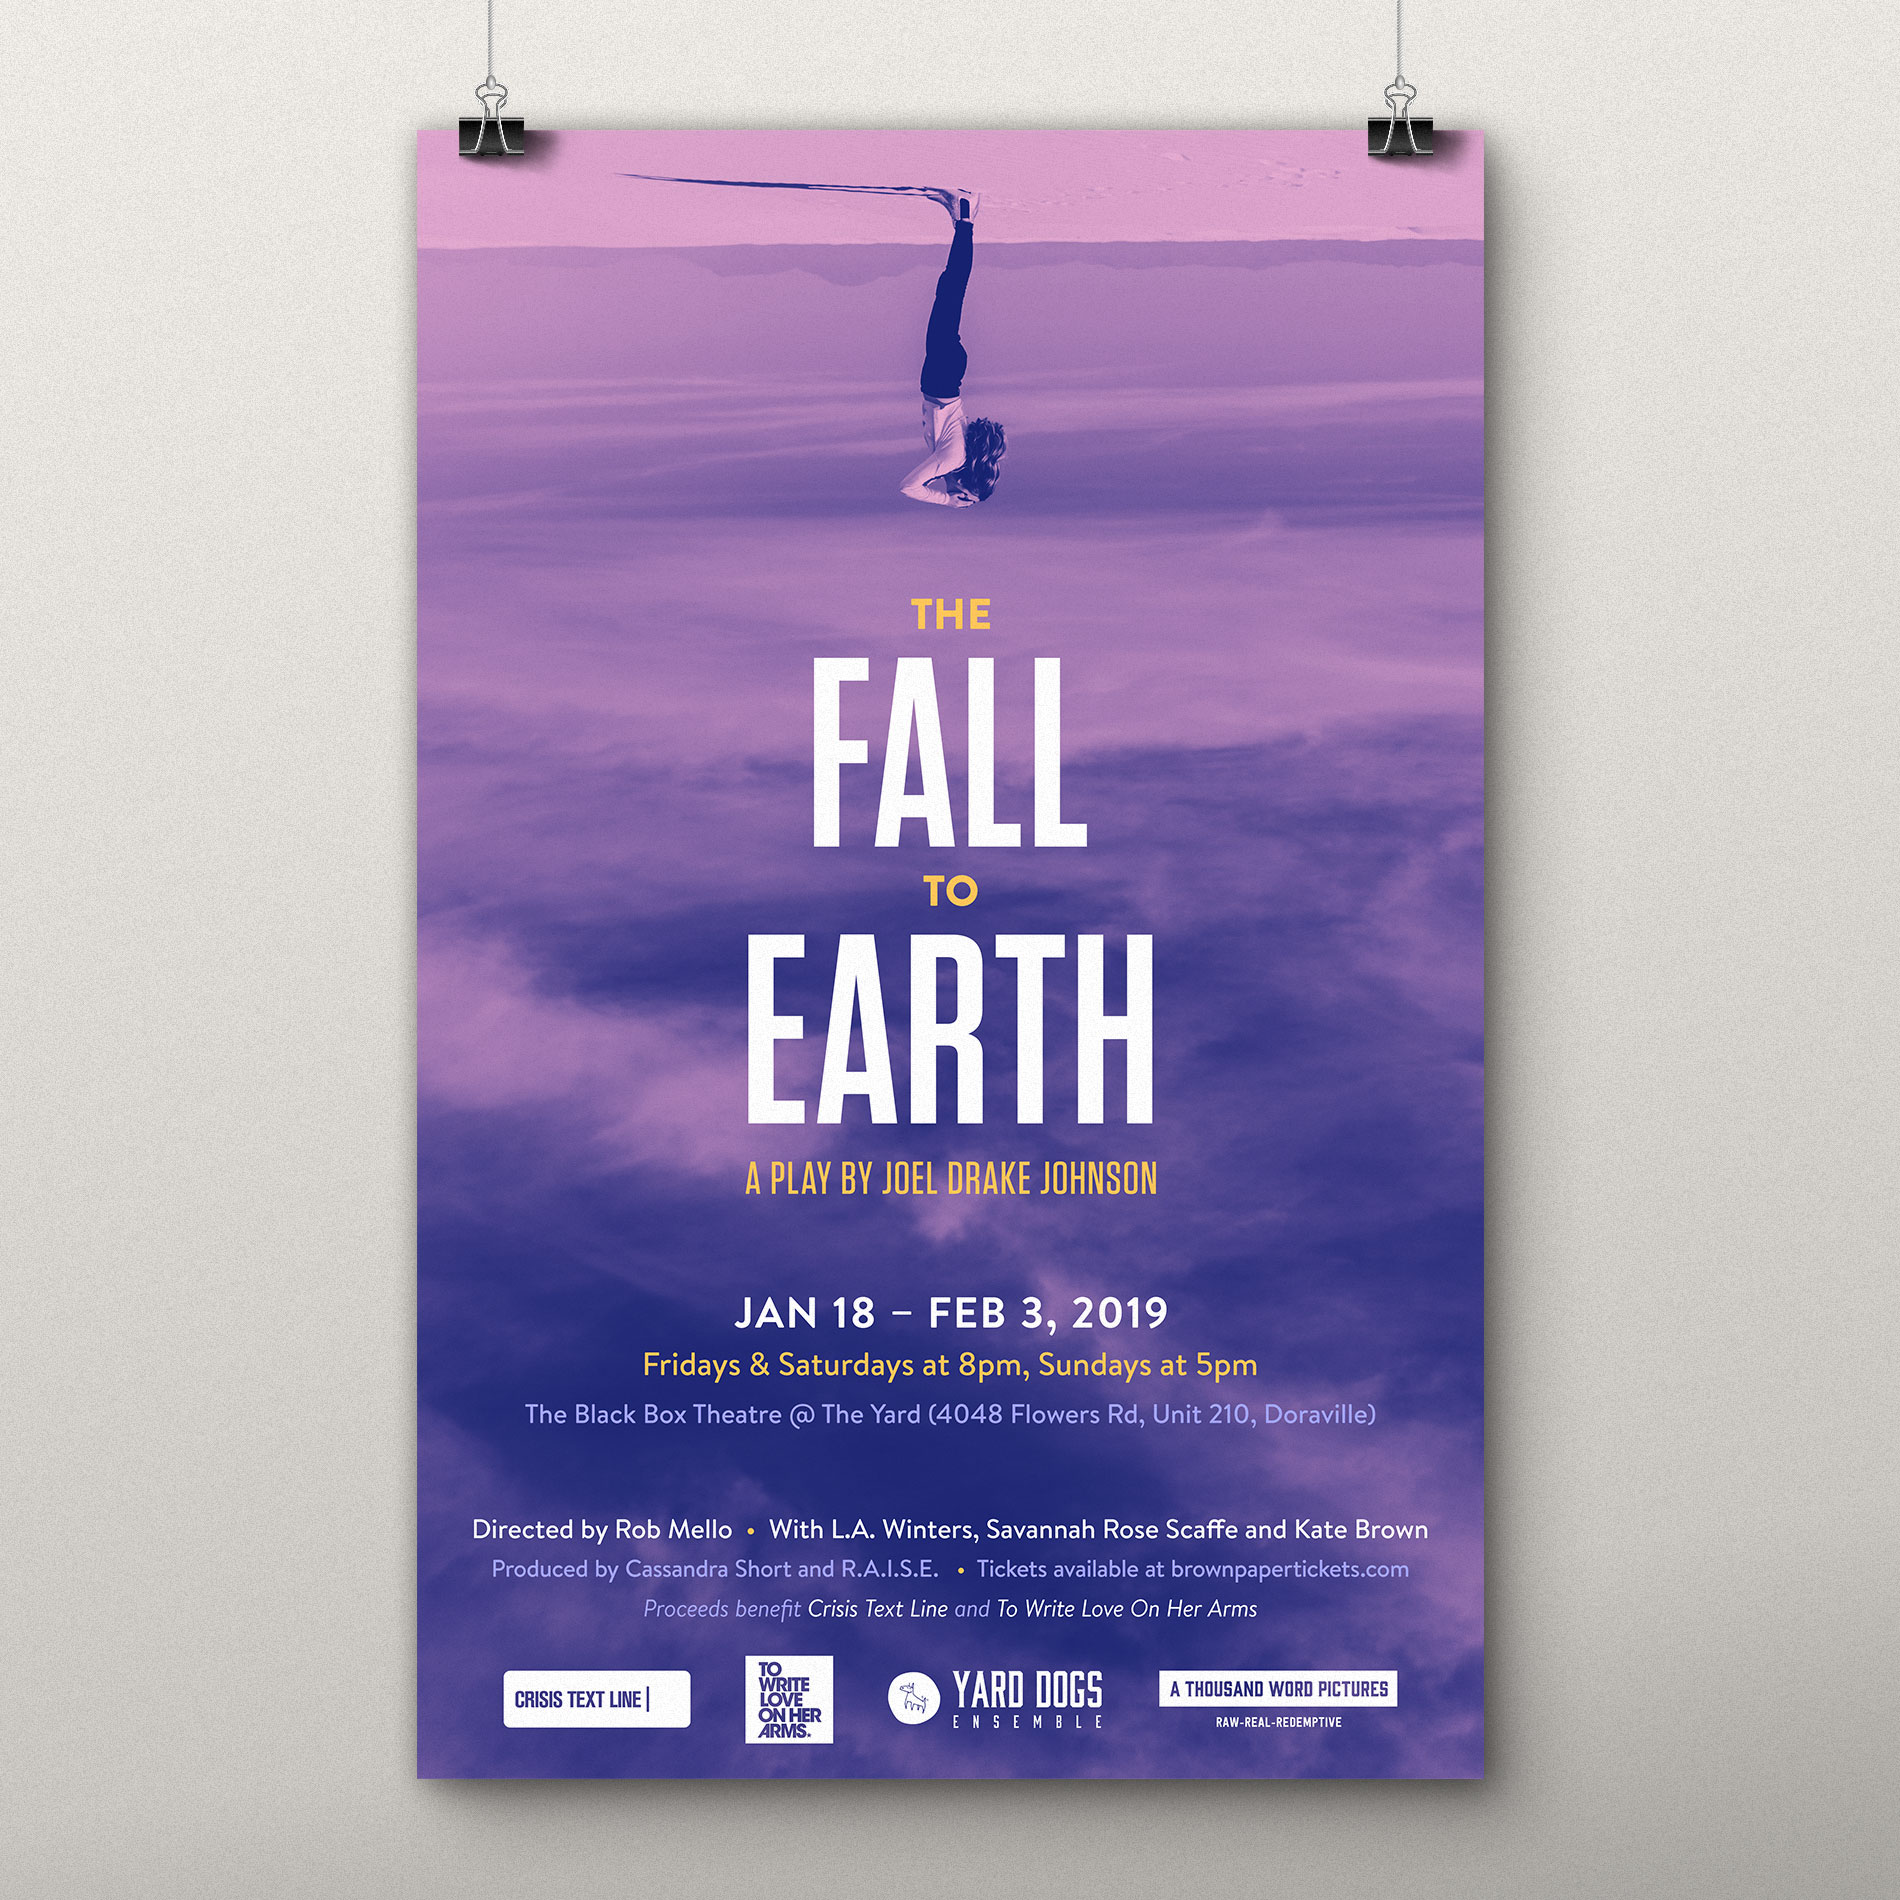 The Fall to Earth